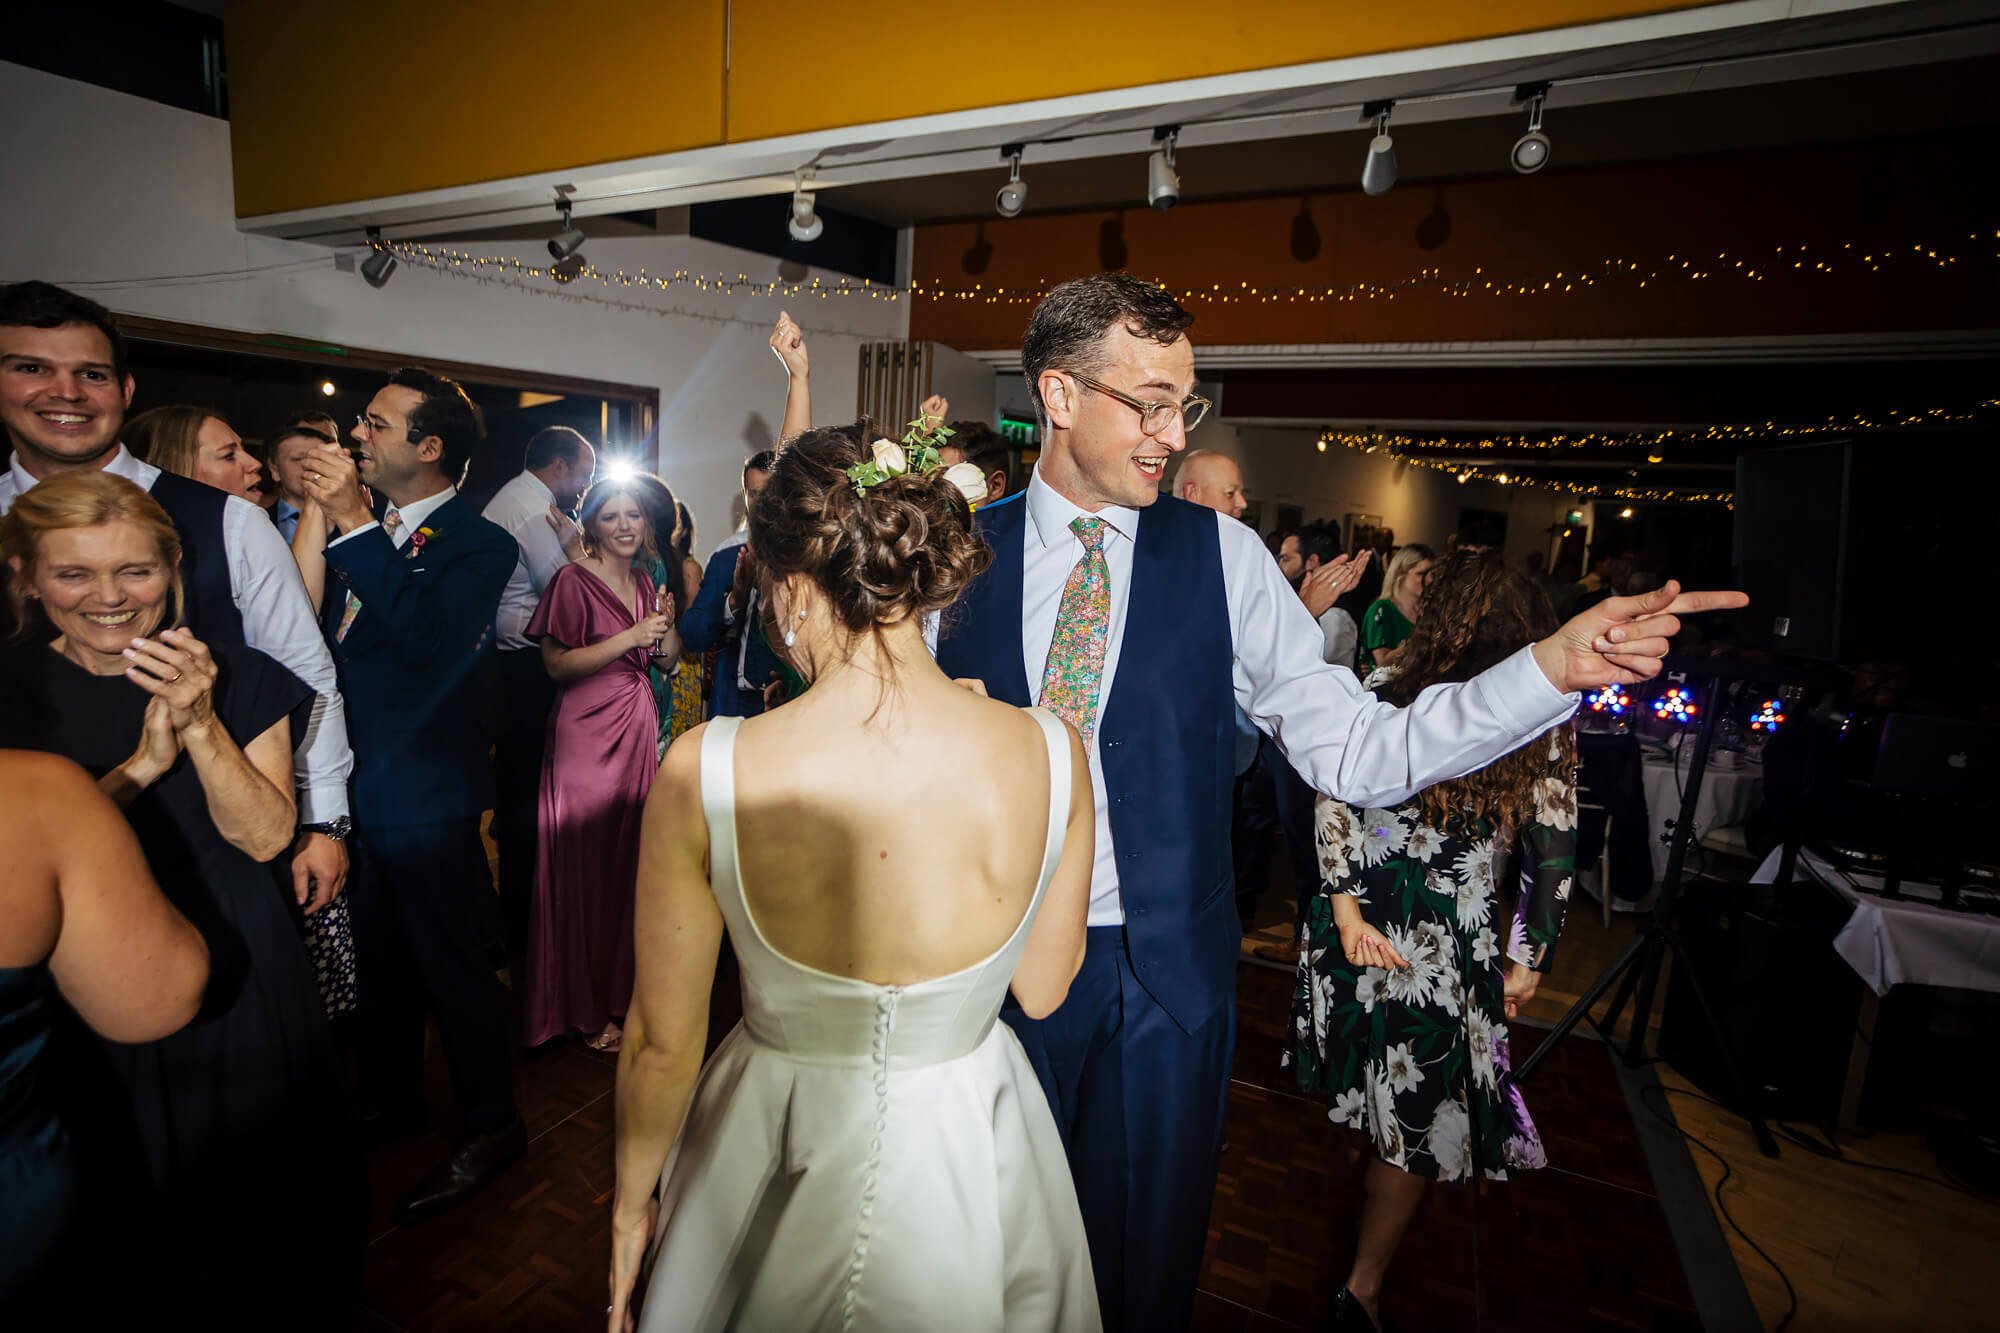 On the dance floor at a Yorkshire wedding